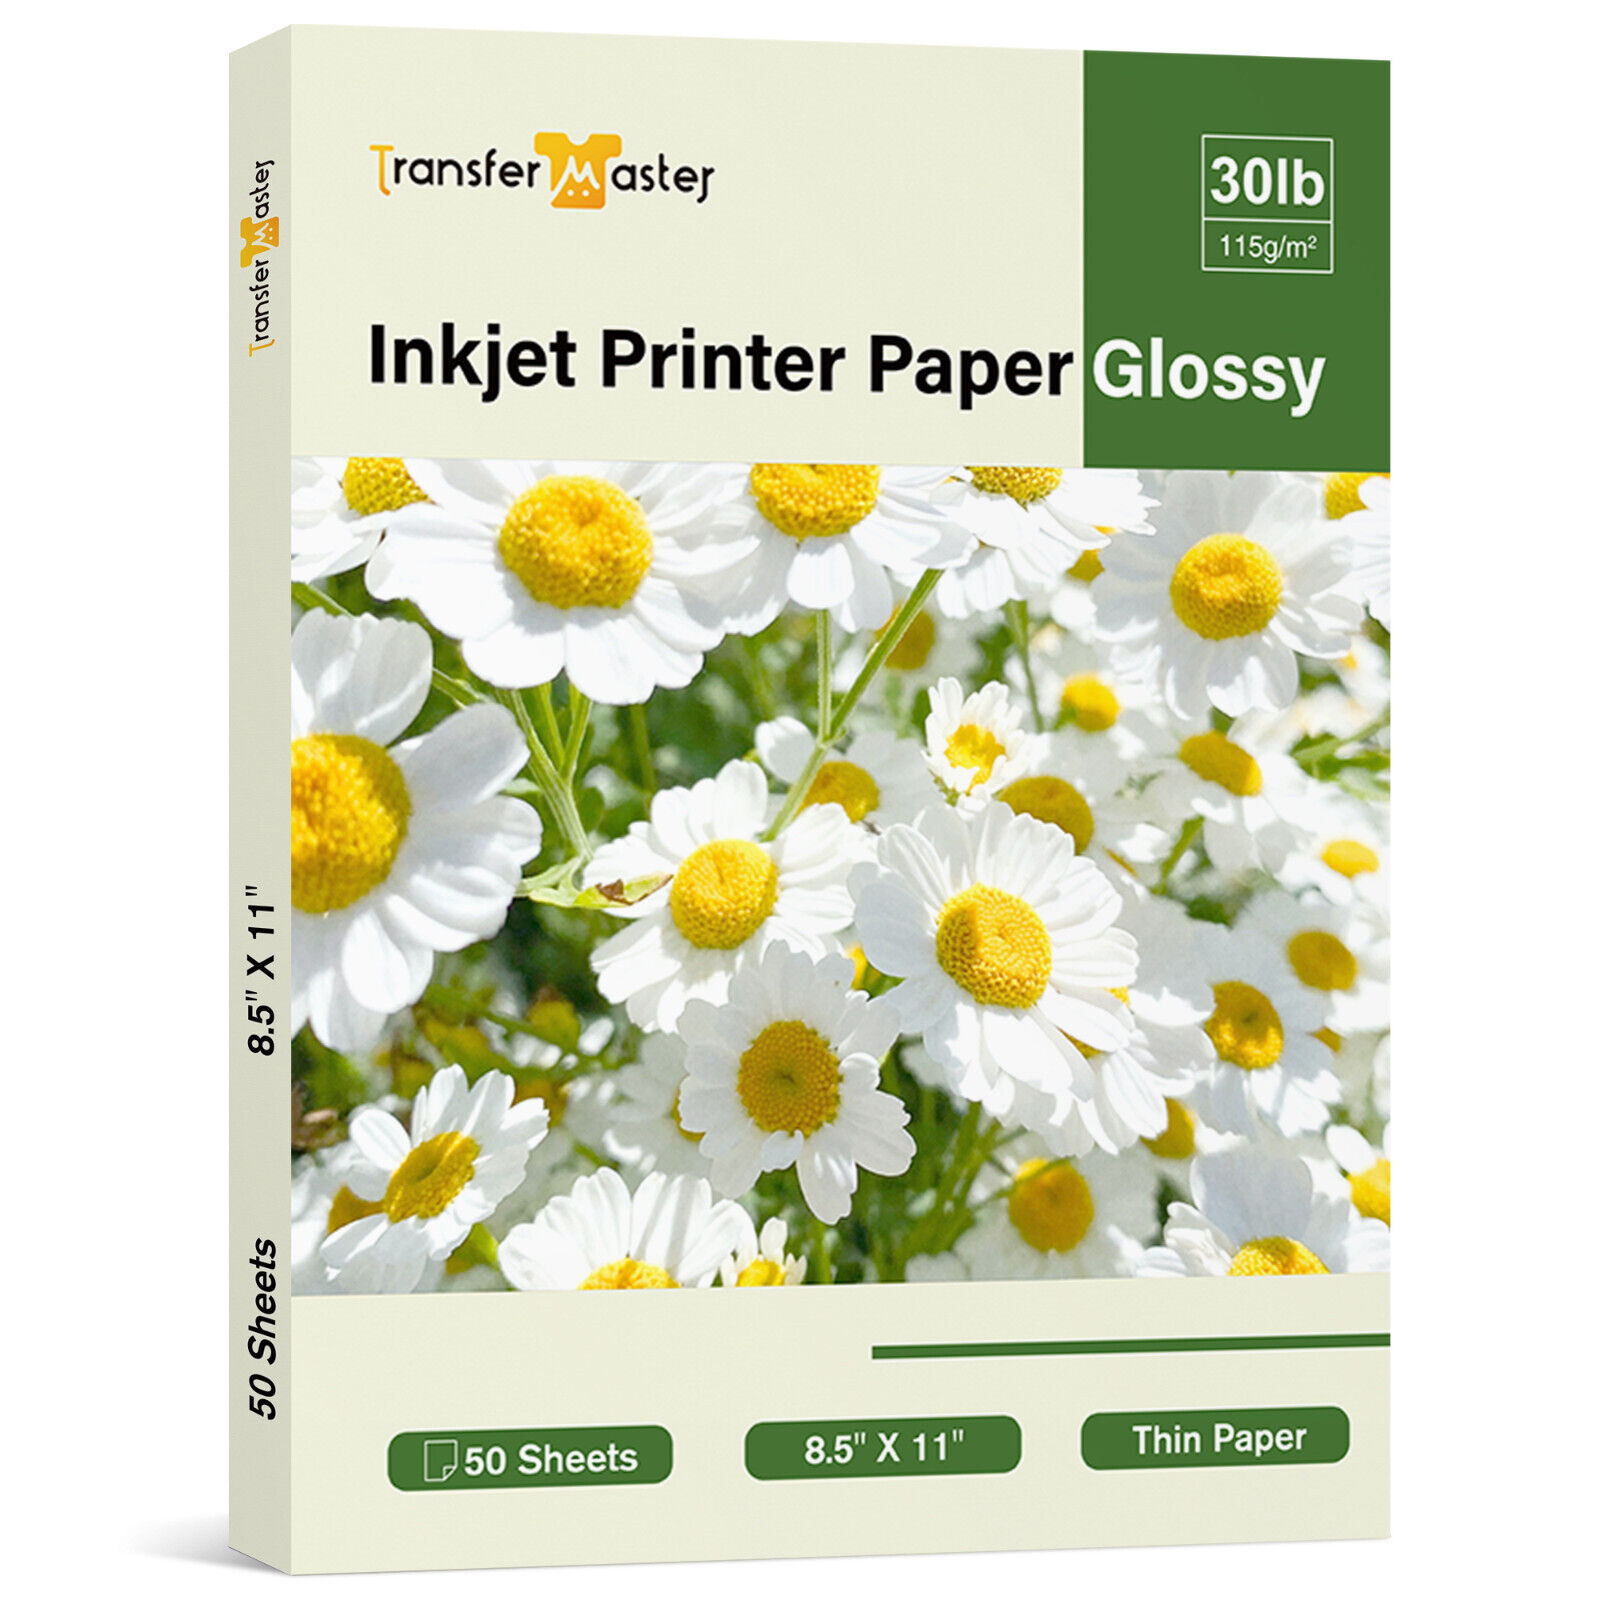 Lot 50-150 Sheets Thin Glossy Printer Paper 8.5x11 30lb for Inkjet, Flyer Paper